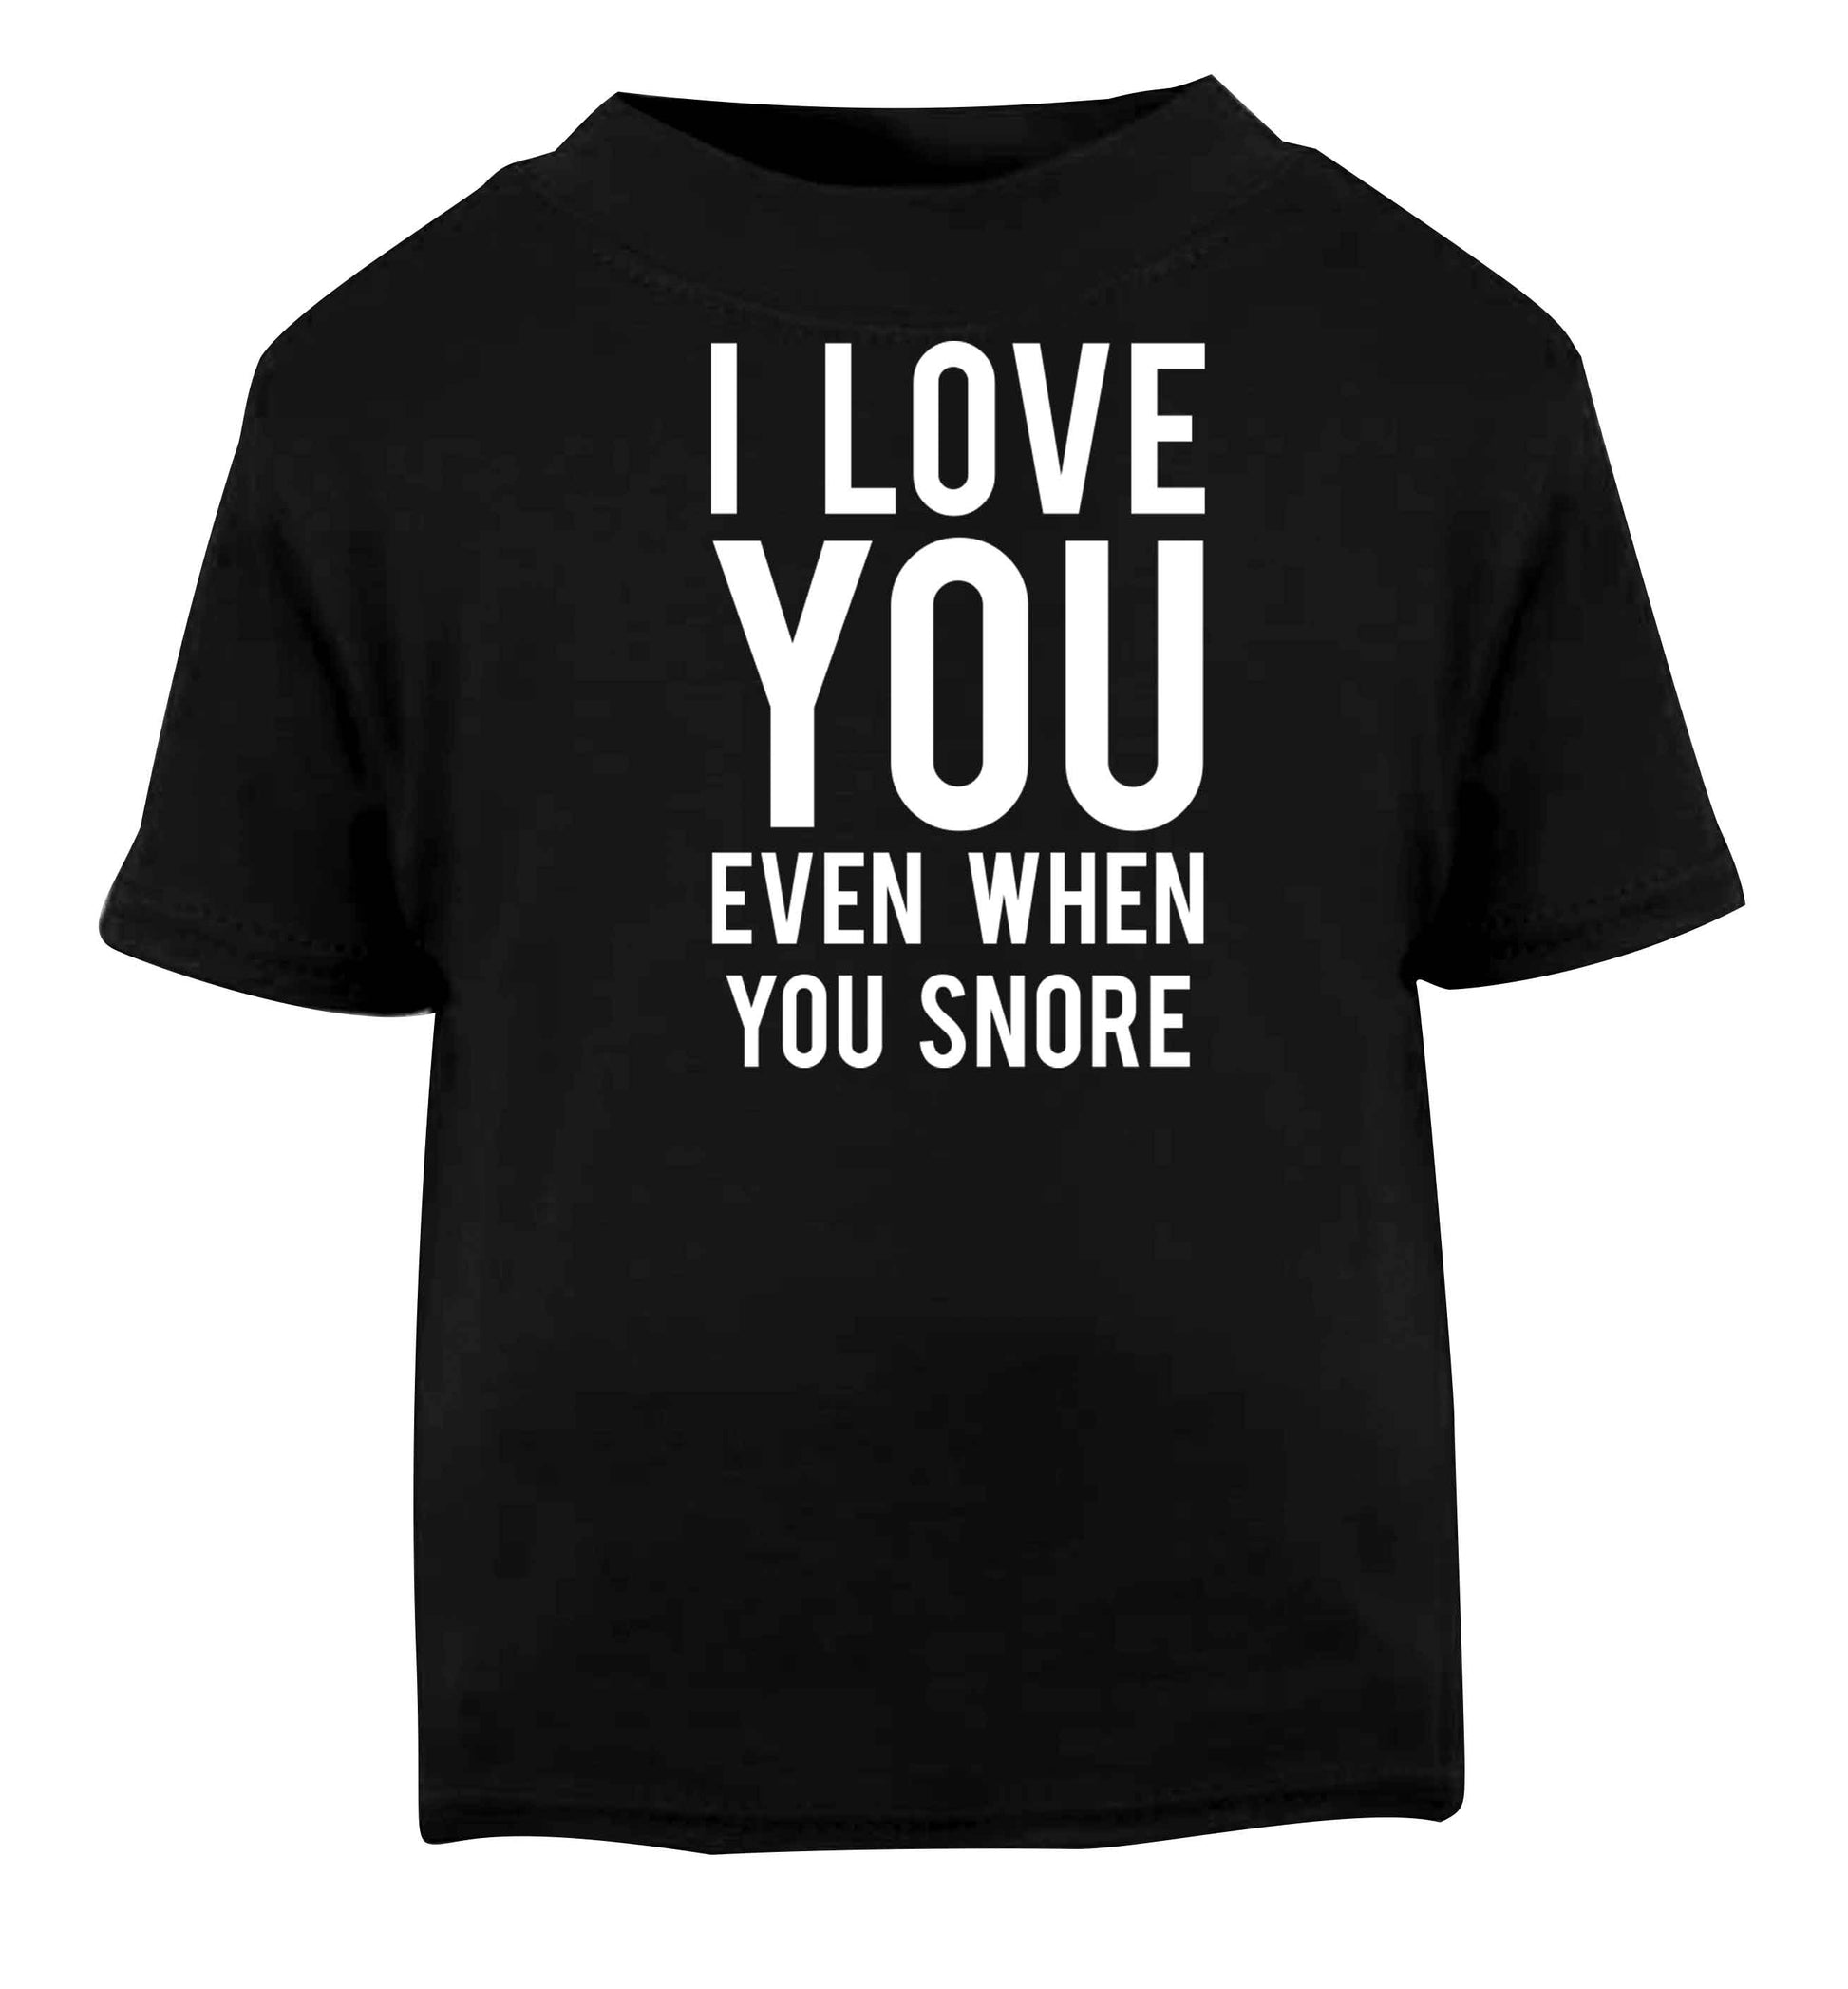 I love you even when you snore Black baby toddler Tshirt 2 years